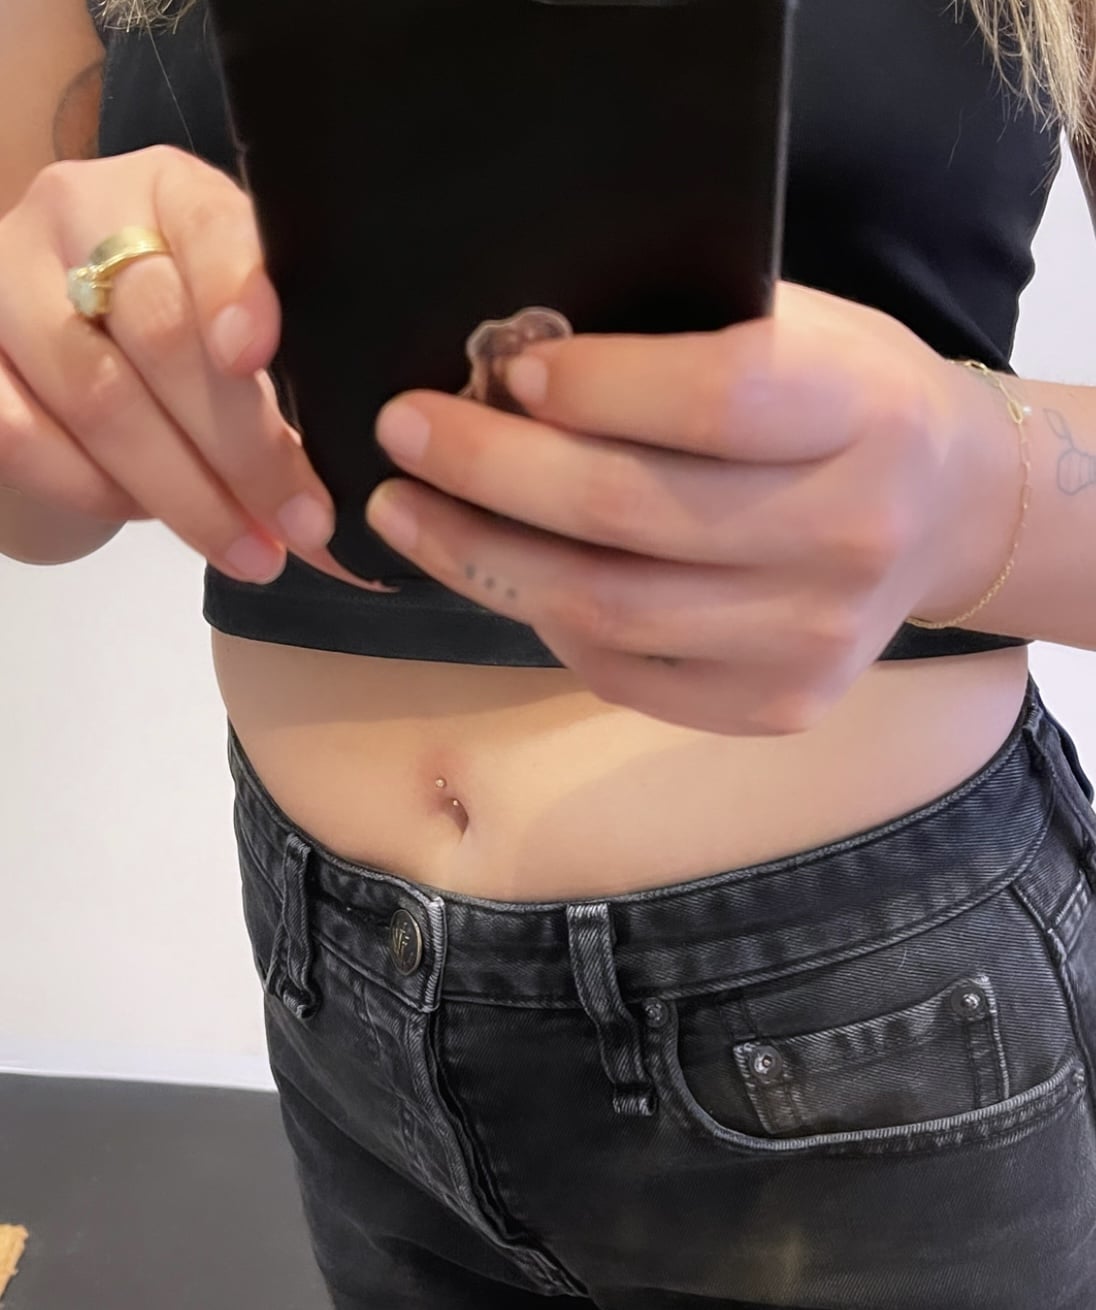 Navel & Belly Piercing Guide: Everything You Need to Know